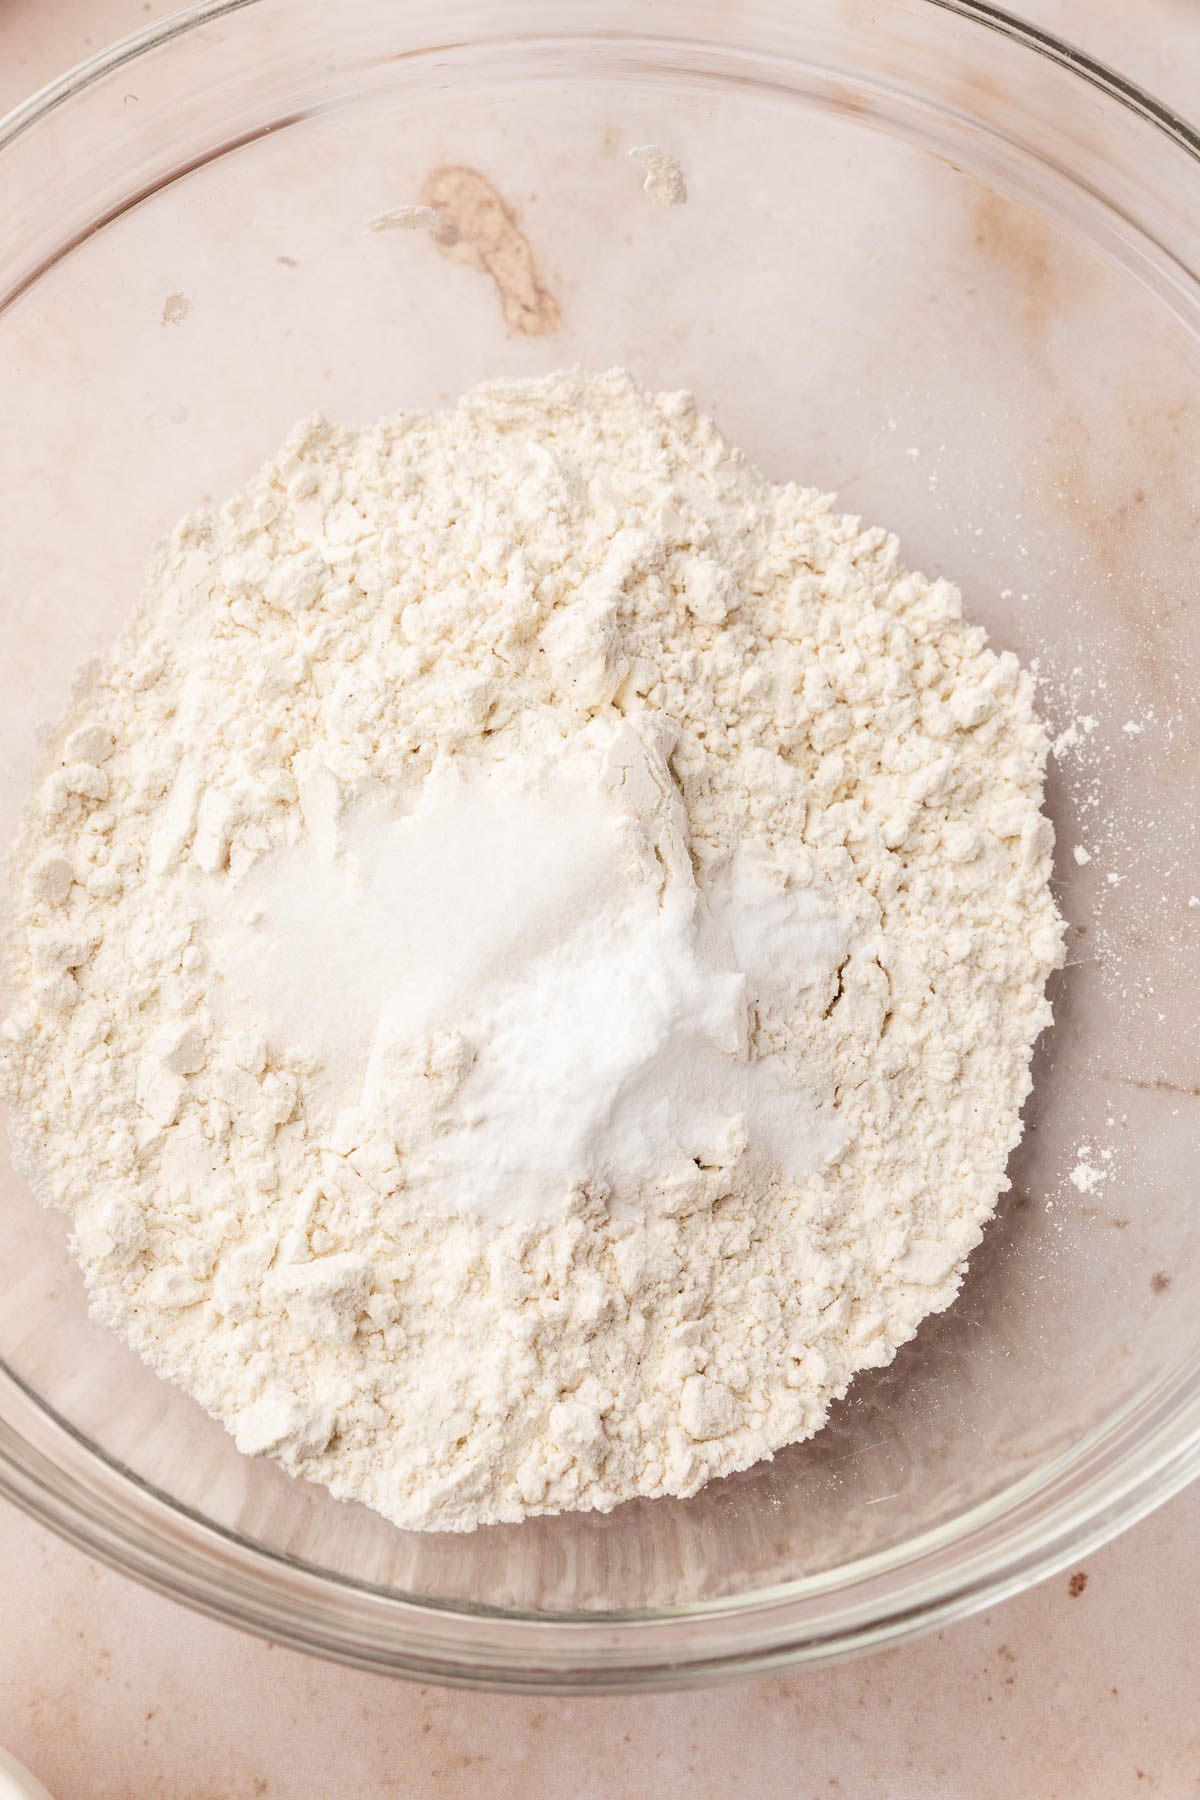 A glass mixing bowl of gluten-free flour topped with baking soda and salt before whisking together.